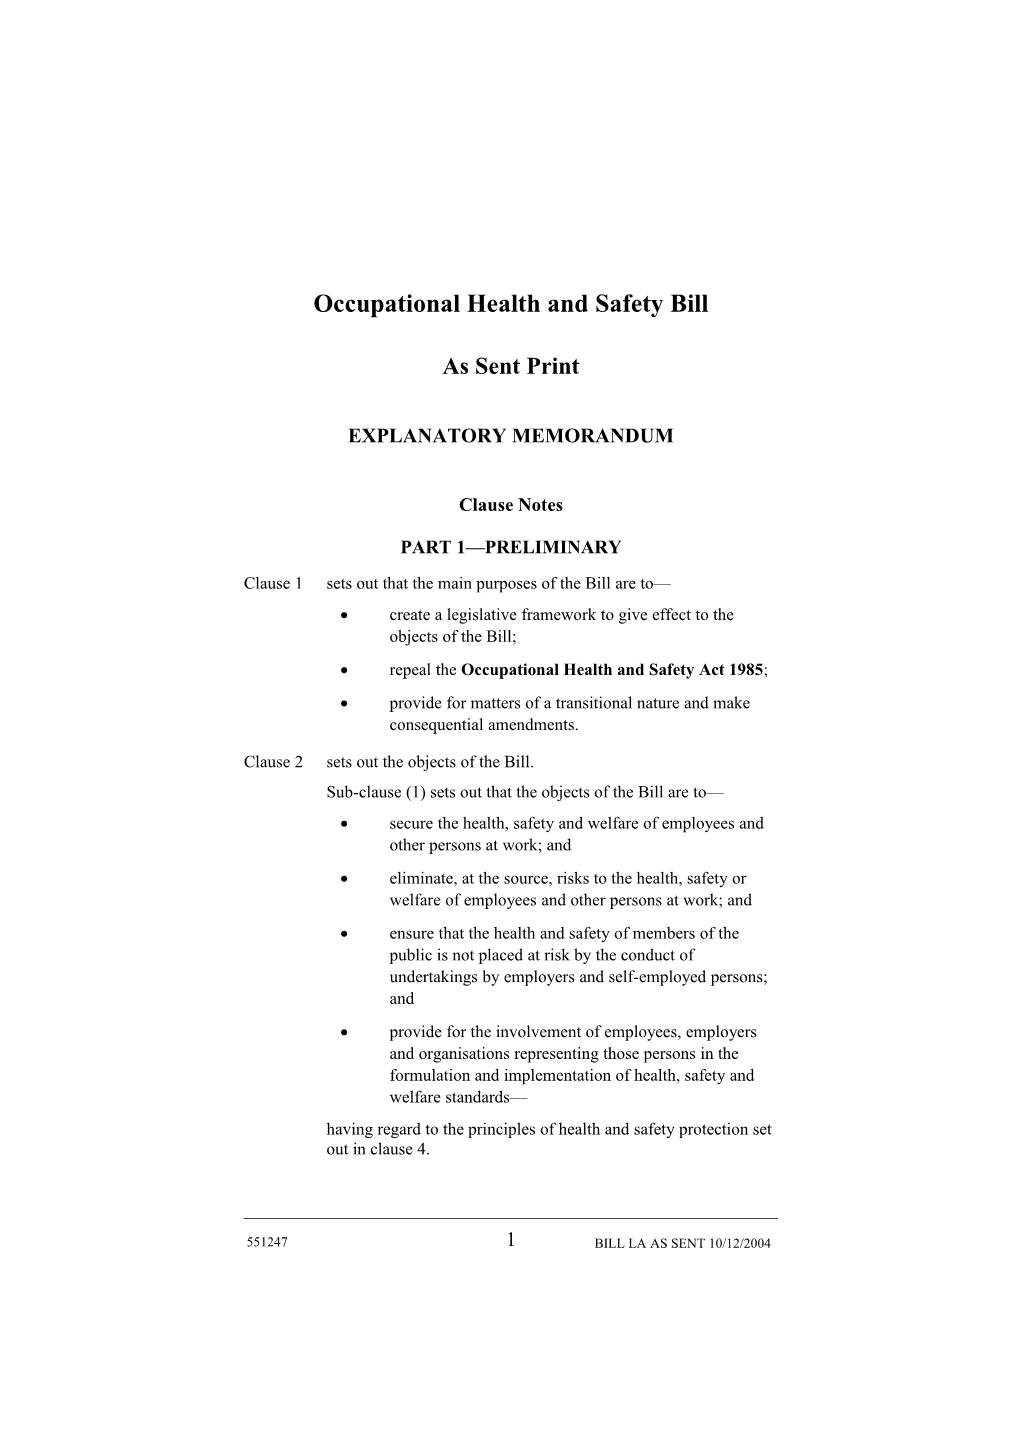 Occupational Health and Safety Bill